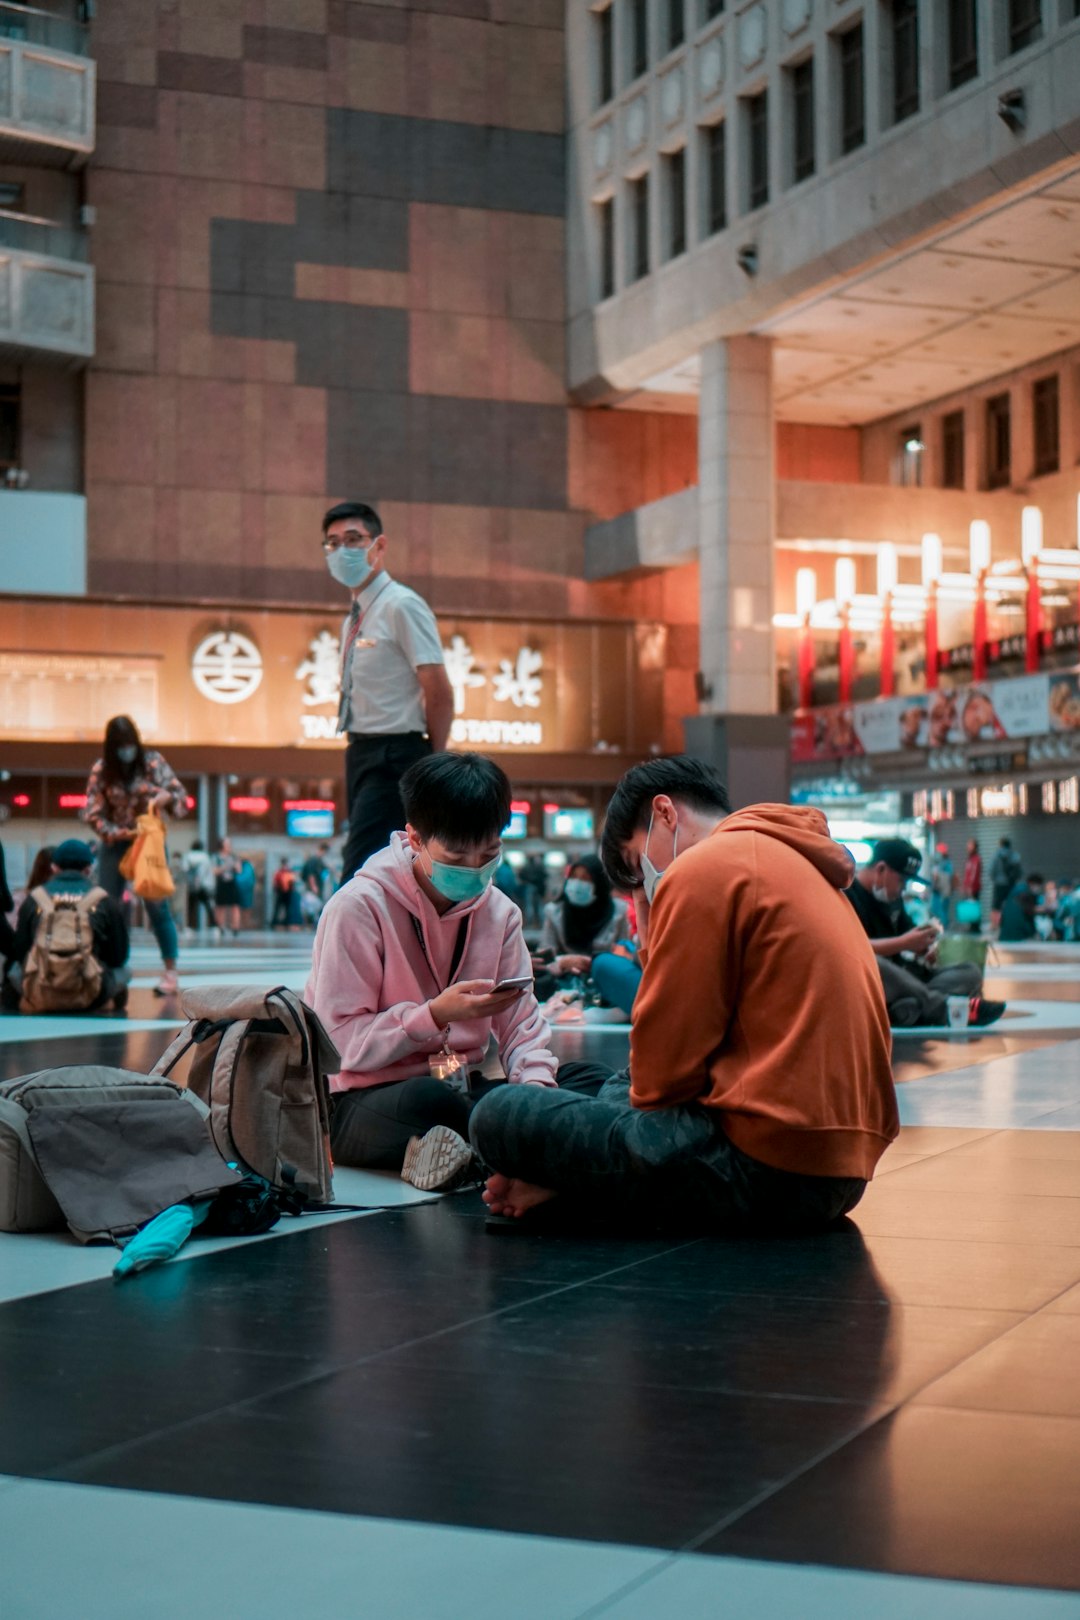 Travel Tips and Stories of Taipei Main Station in Taiwan